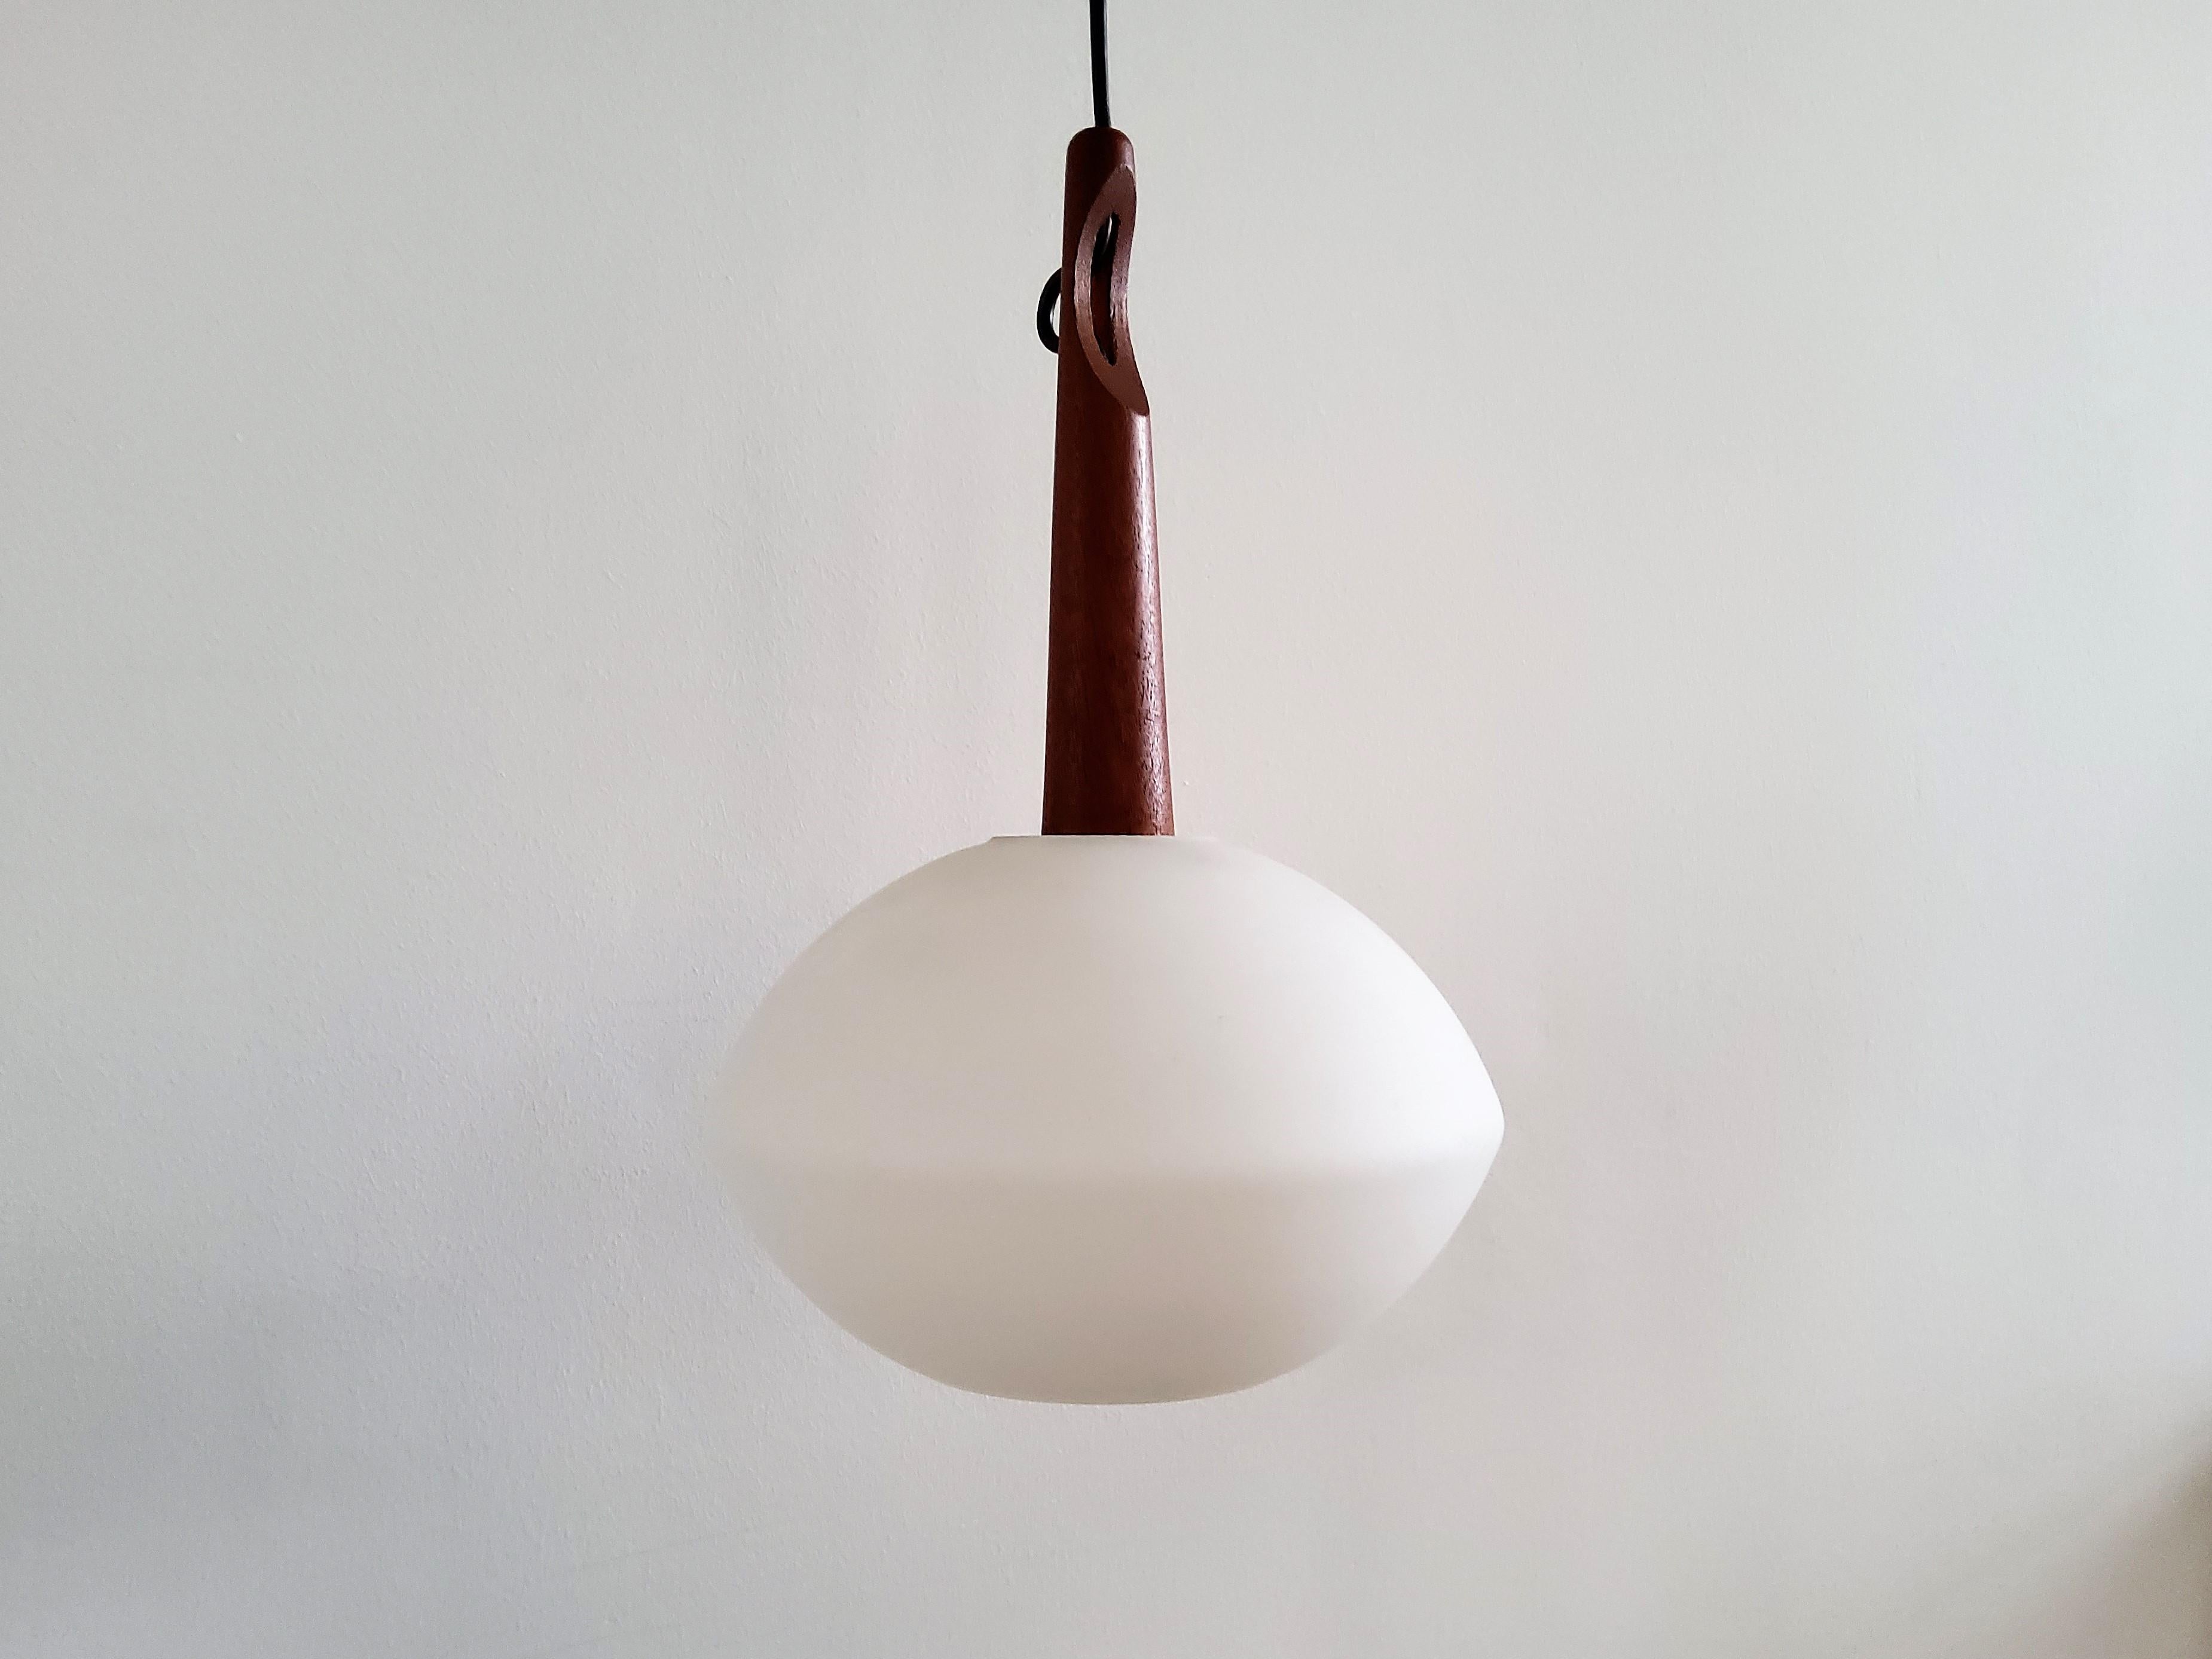 This very elegant pendant lamp was designed by Uno and Östen Kristiansson for Luxus in Sweden in the 1950's. It has an opaline glass shade with a teak wooden suspension. It gives a beautiful warm light when lit. This lamp is in a good condition,